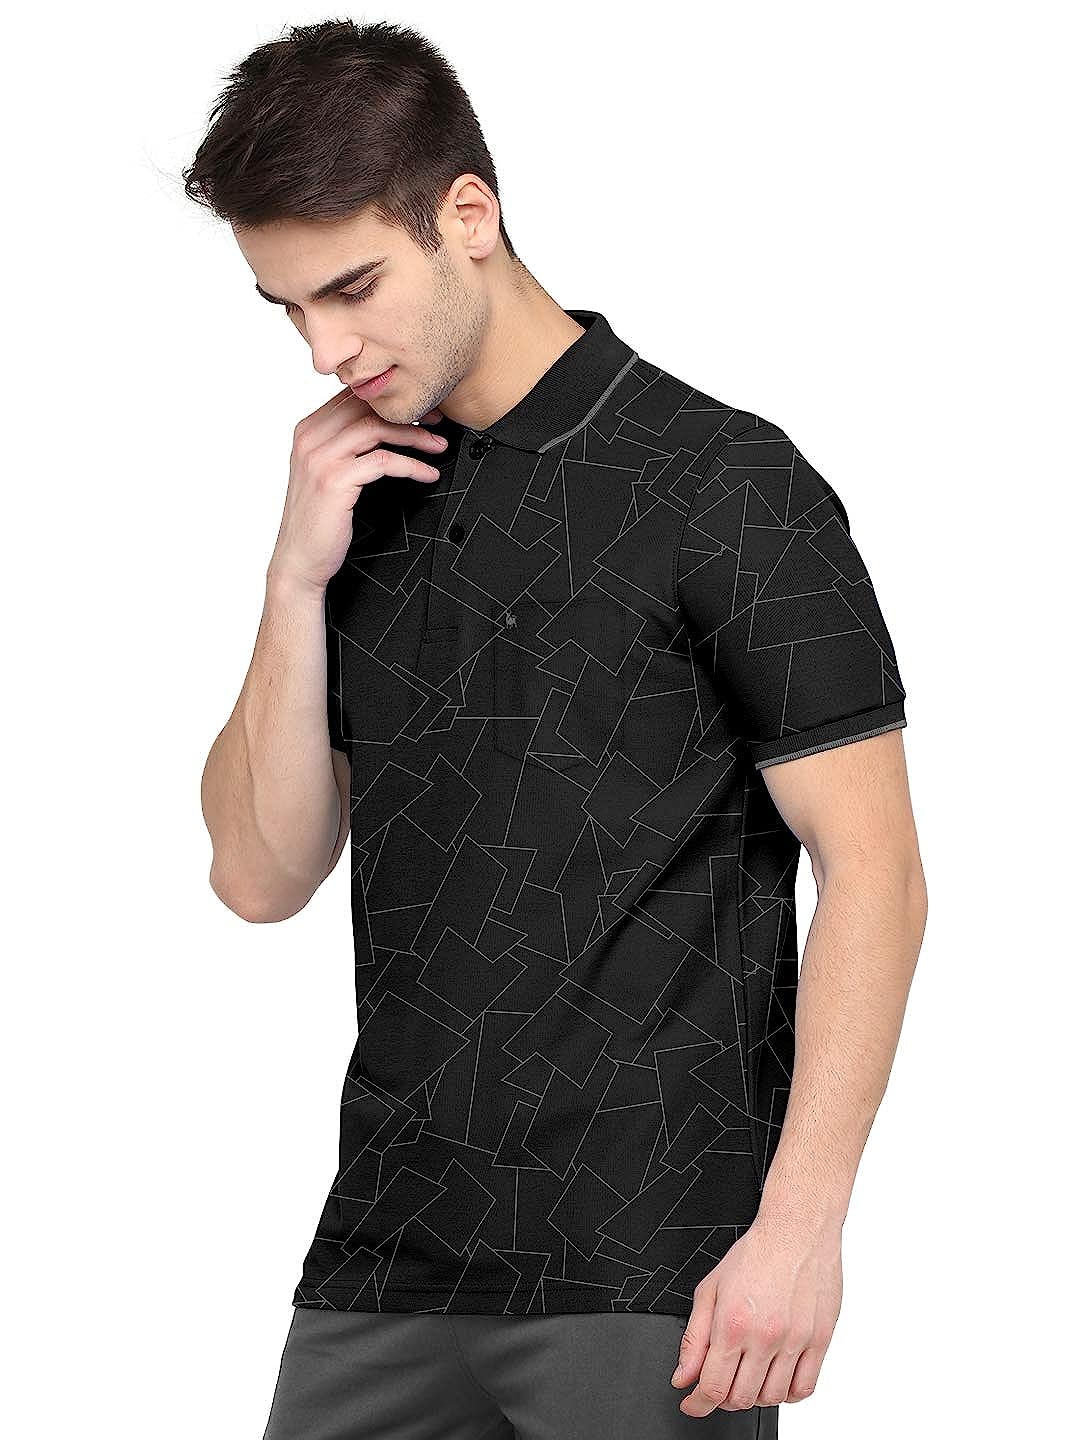 BULLMER Mens Regular Fit Printed Cotton Polo Tshirt -  Men's T-Shirts in Sri Lanka from Arcade Online Shopping - Just Rs. 3500!